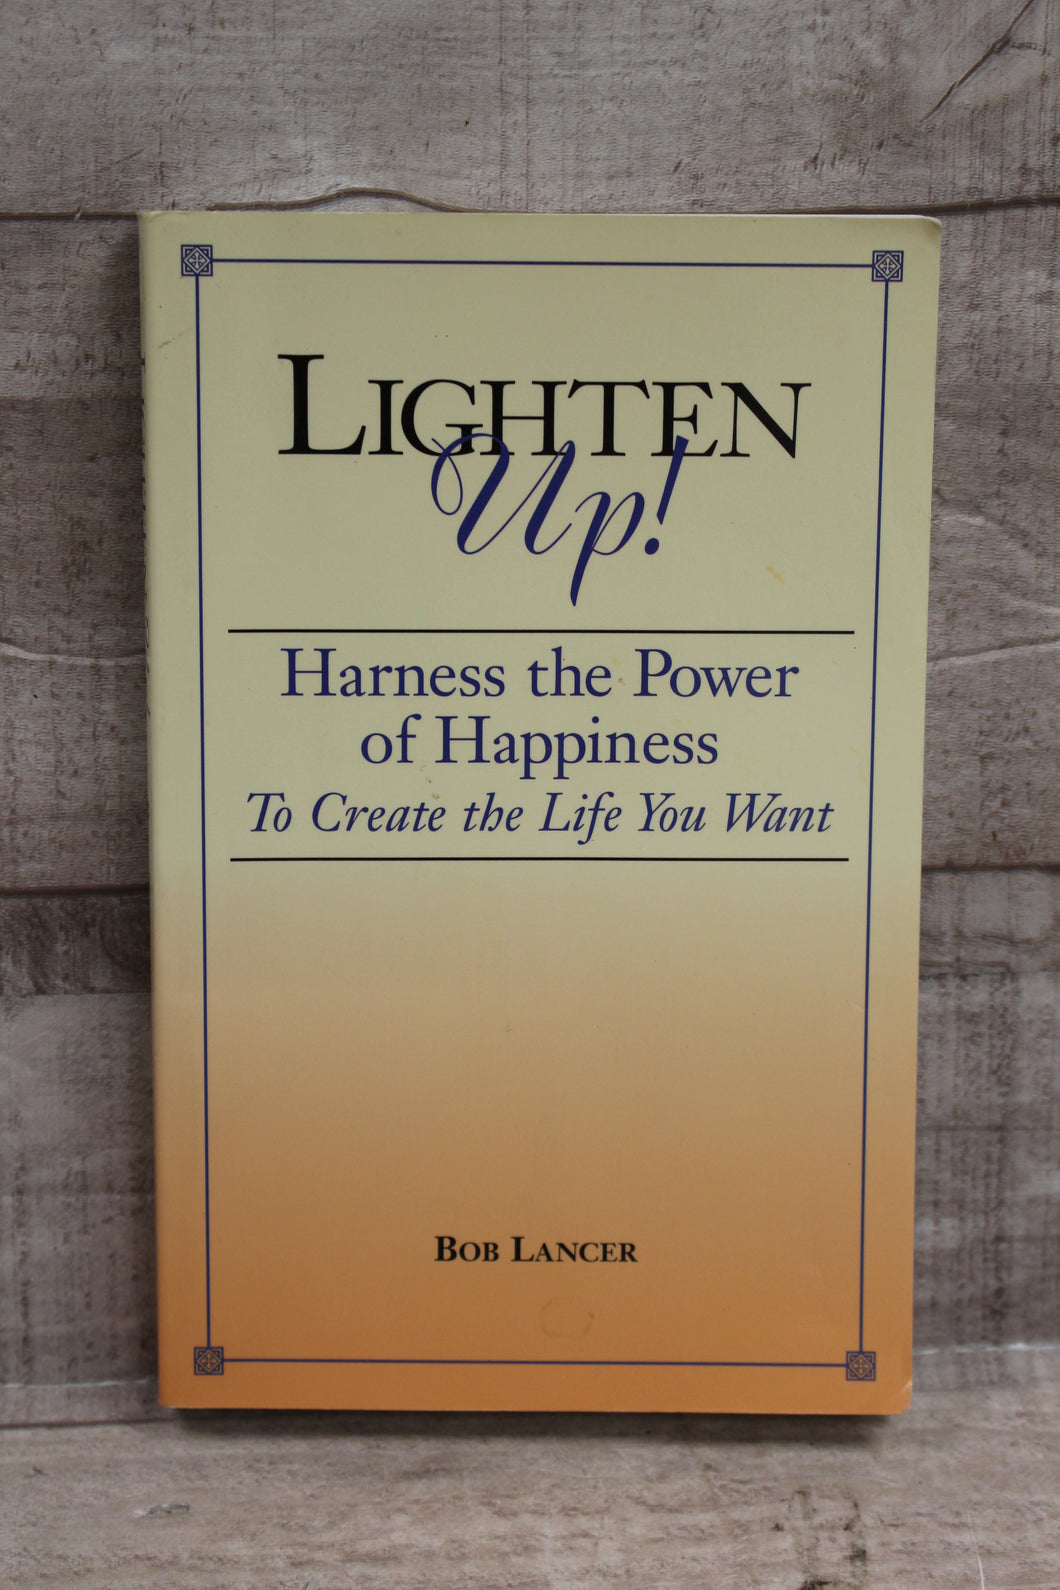 Lighten Up Harness The Power Of Happiness By Bob Lancer -Used